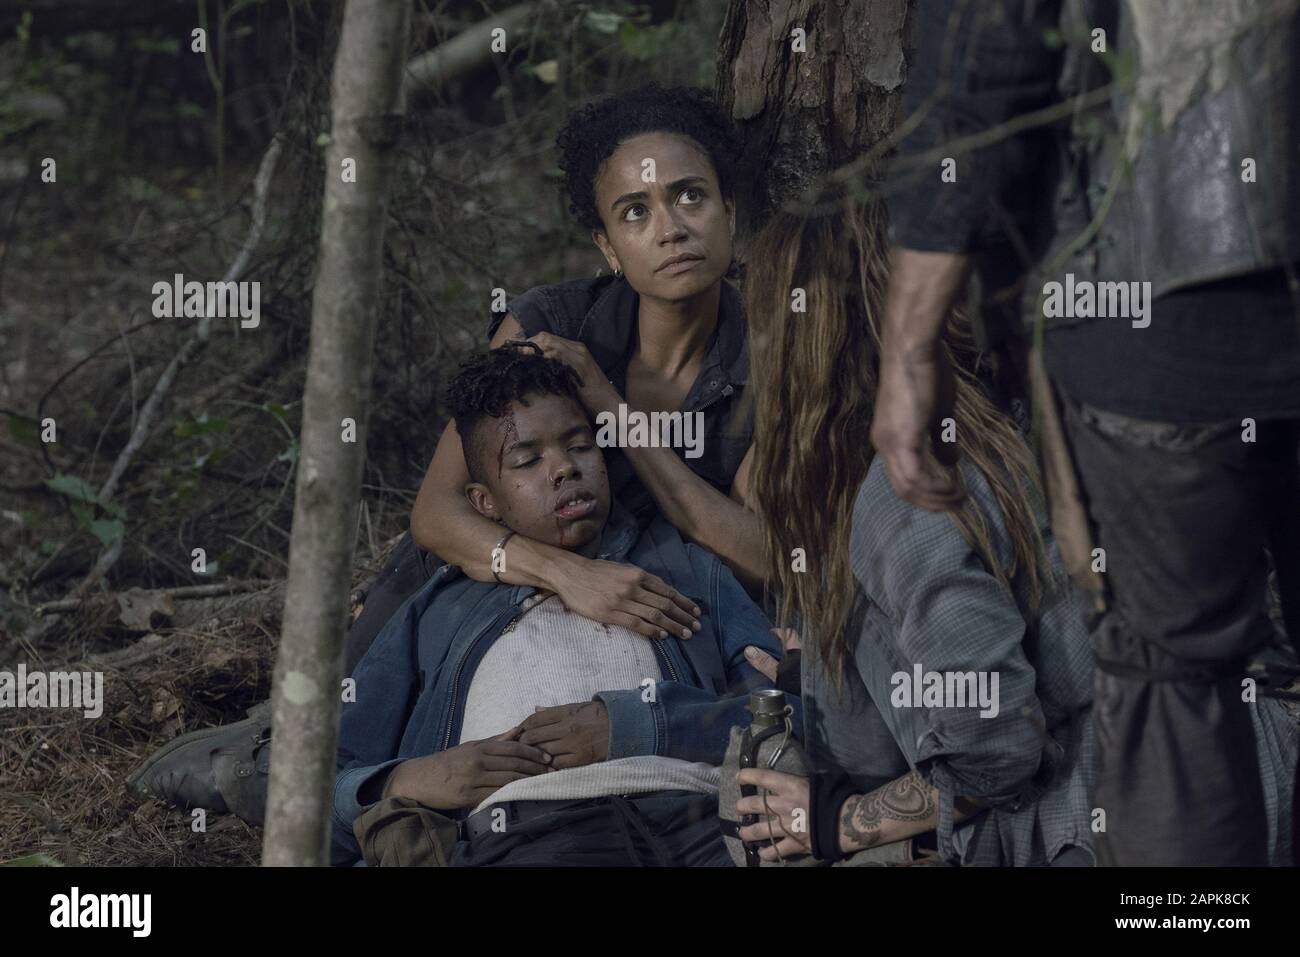 Lauren Ridloff as Connie, Nadia Hilker as Magna, Angel Theory as Kelly - The Walking Dead   Season 10, Episode 5 - Photo Credit: Jace Downs/AMC (2019-2020) Stock Photo